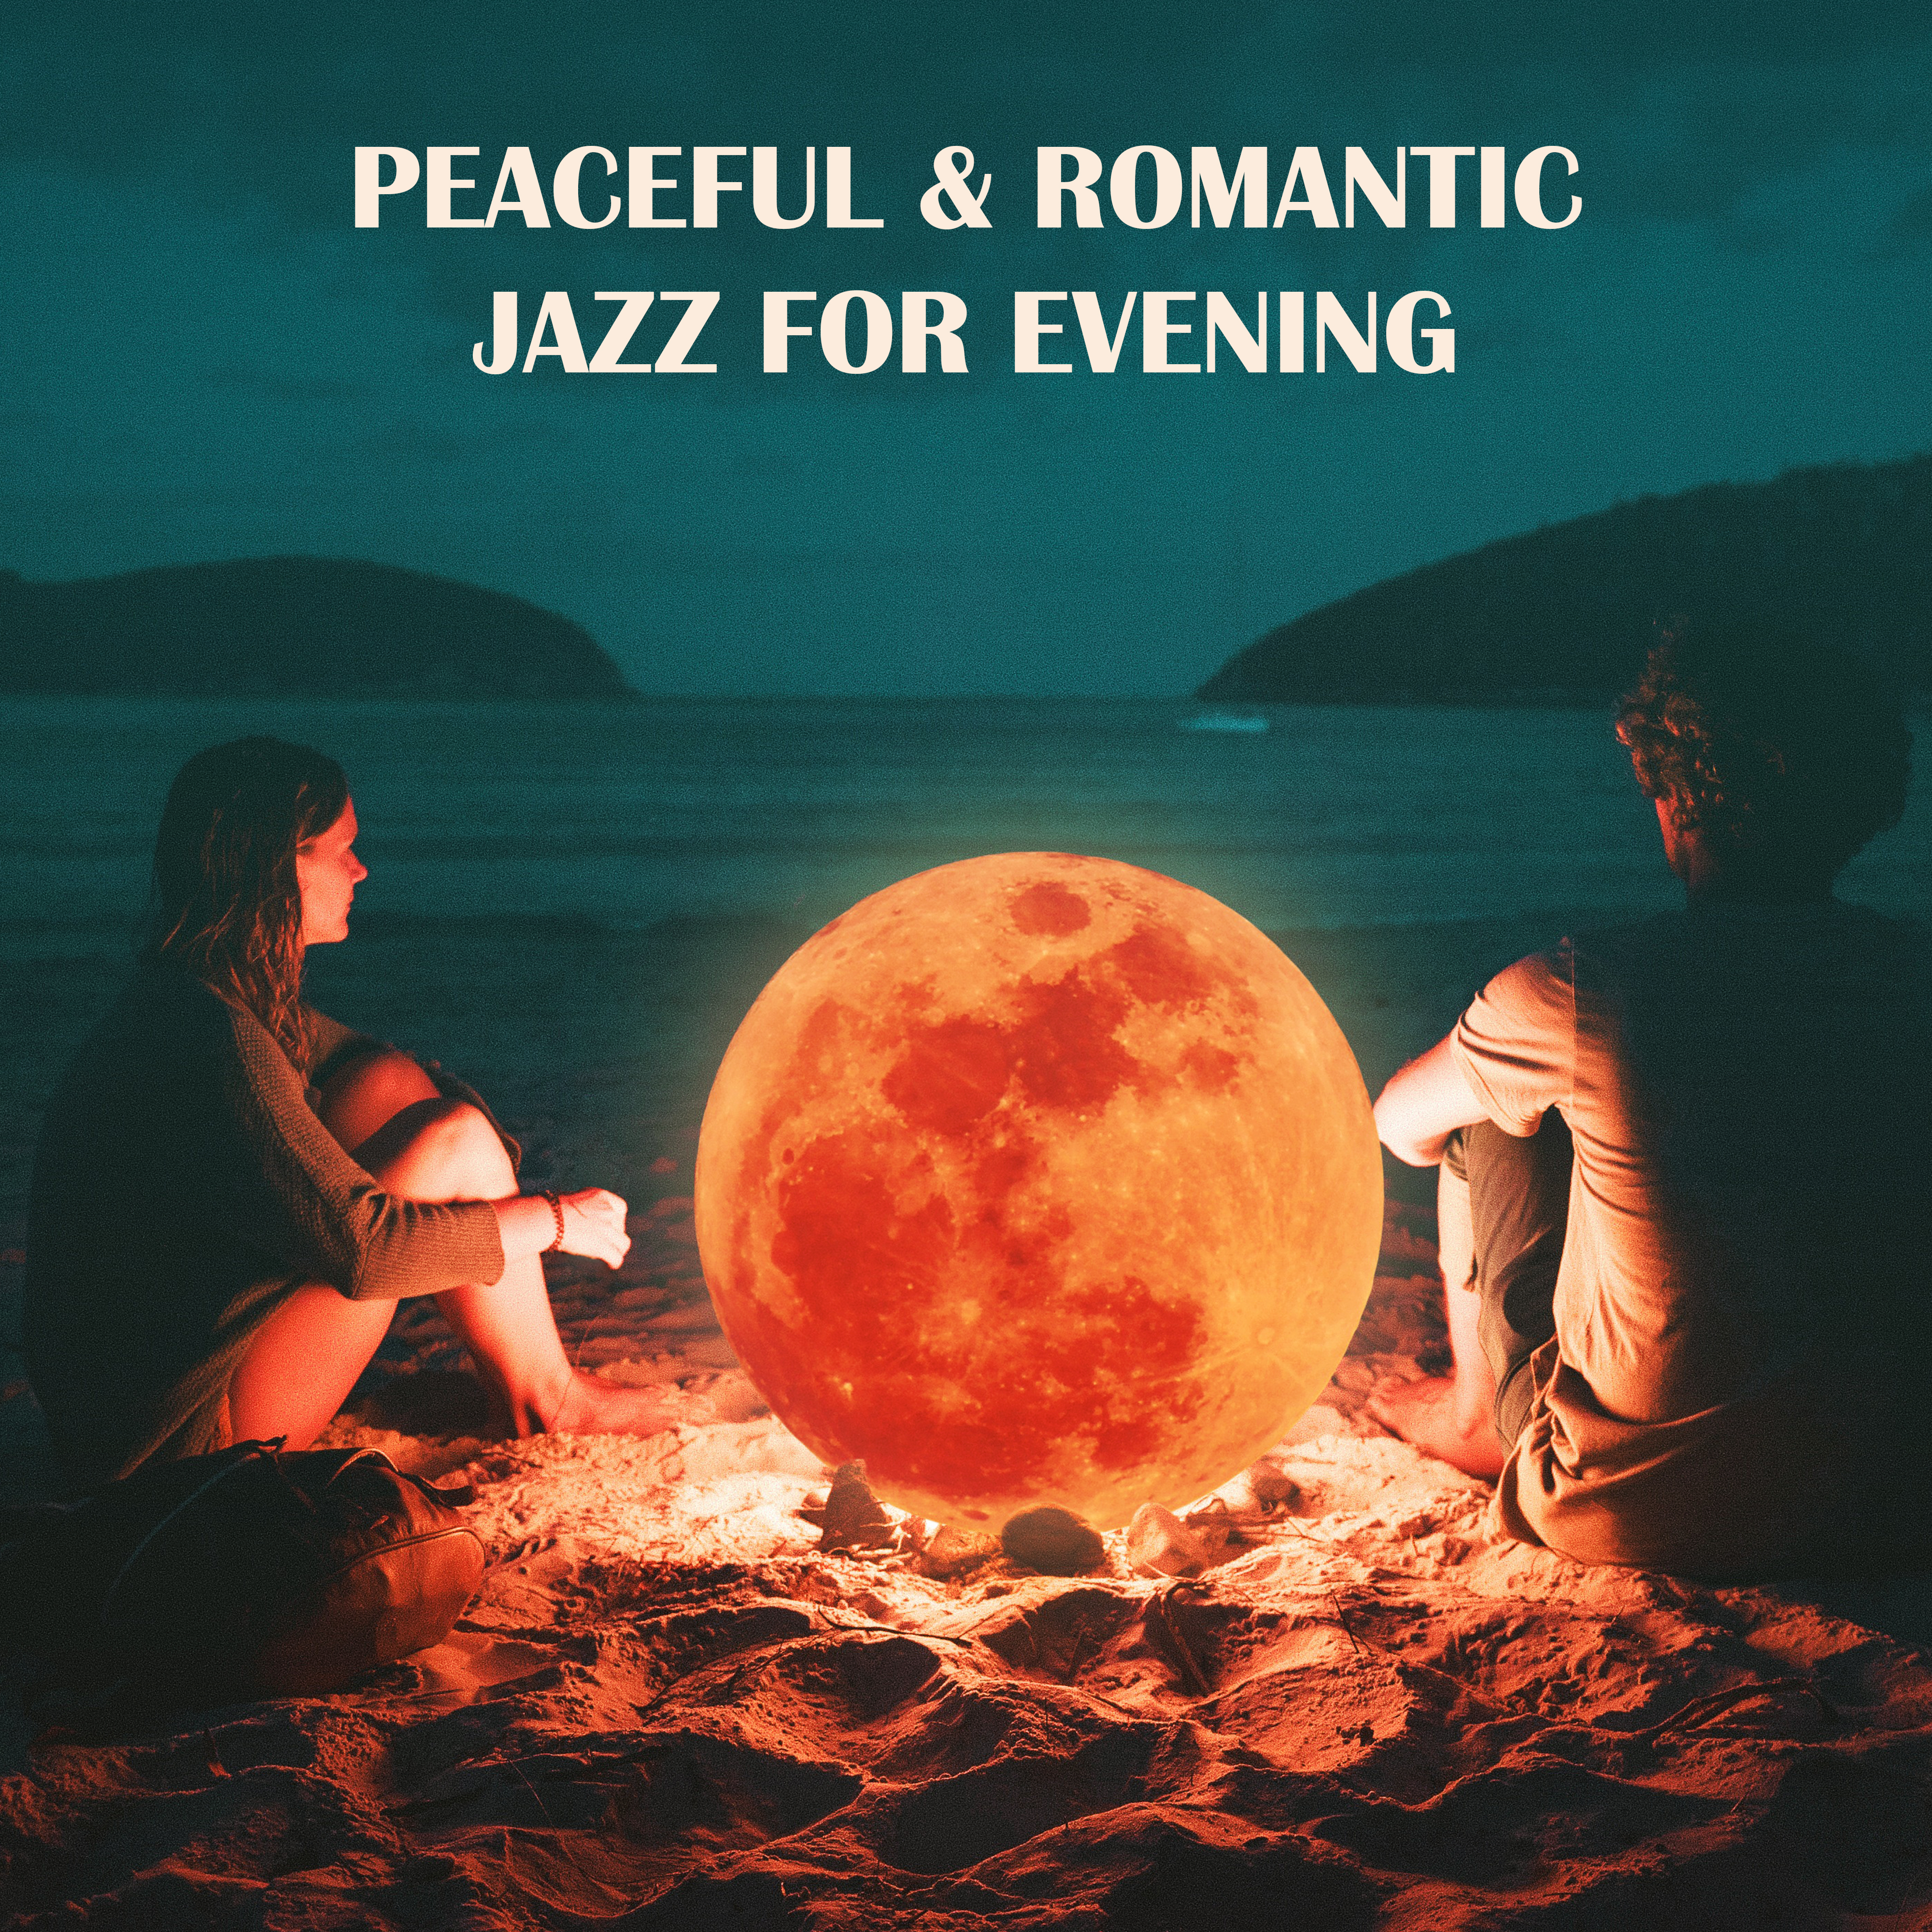 Peaceful & Romantic Jazz for Evening – ****** Melodies, Smooth Sounds for Lovers, Romantic Background Music